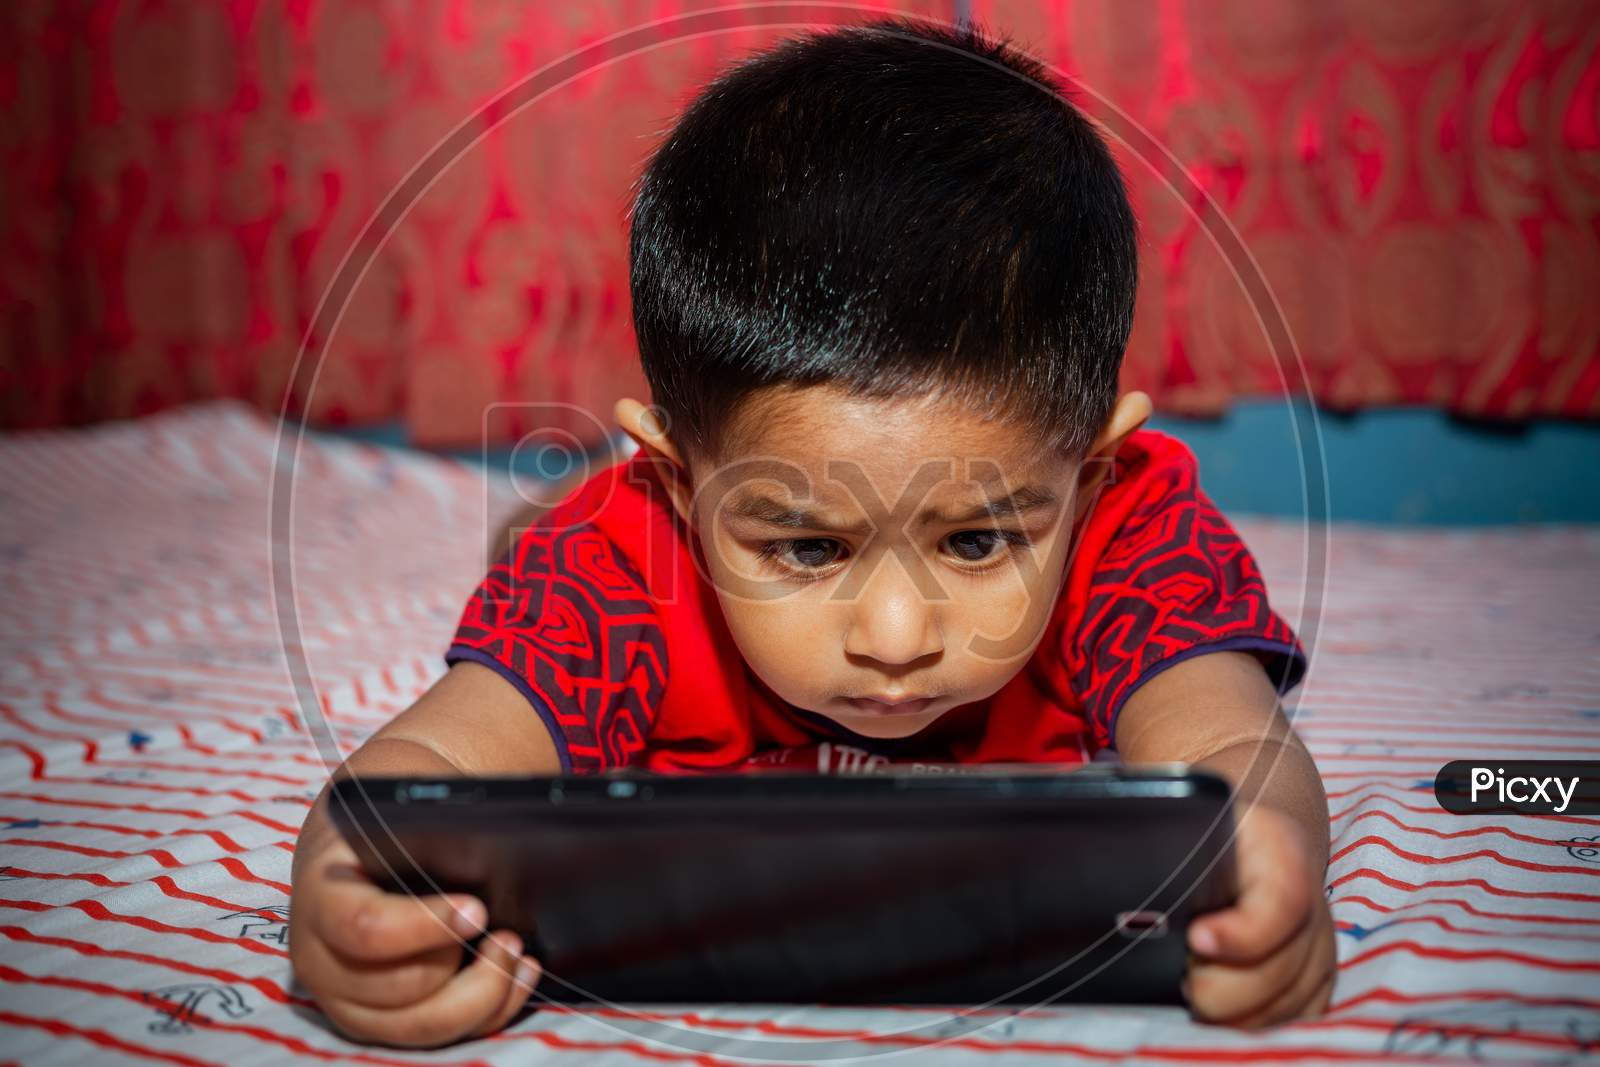 A Child With Full Attention On His Bed Watching Cartoons Using The Tab Smartphone. Kids Playing With Smartphone. Mobile Phone And Internet Addiction Concept.